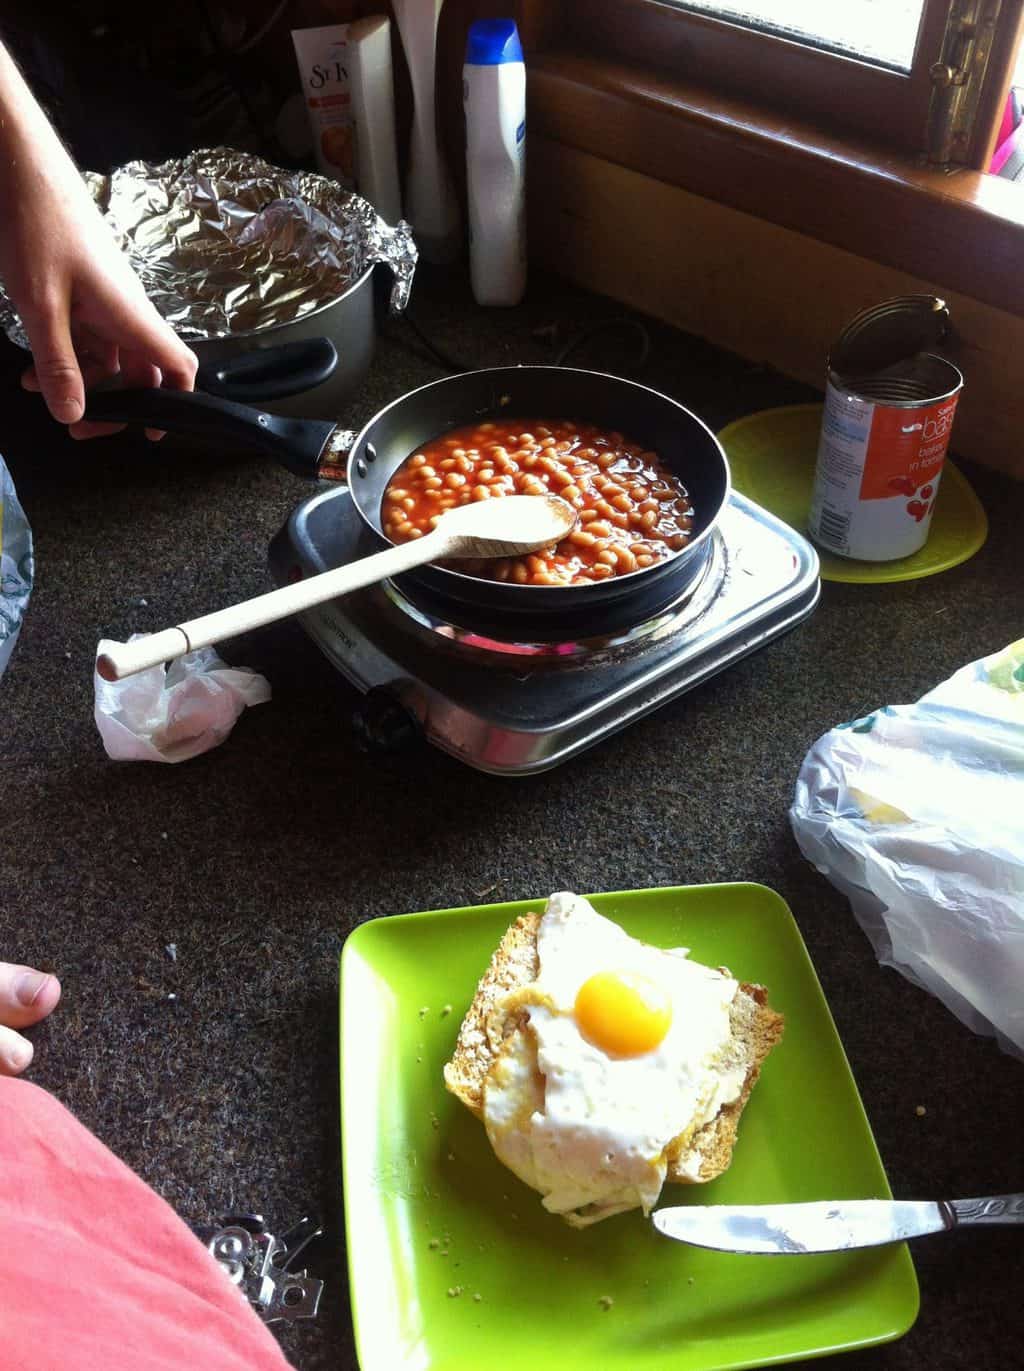 Cooking baked beans on an electric hob in a glamping hut